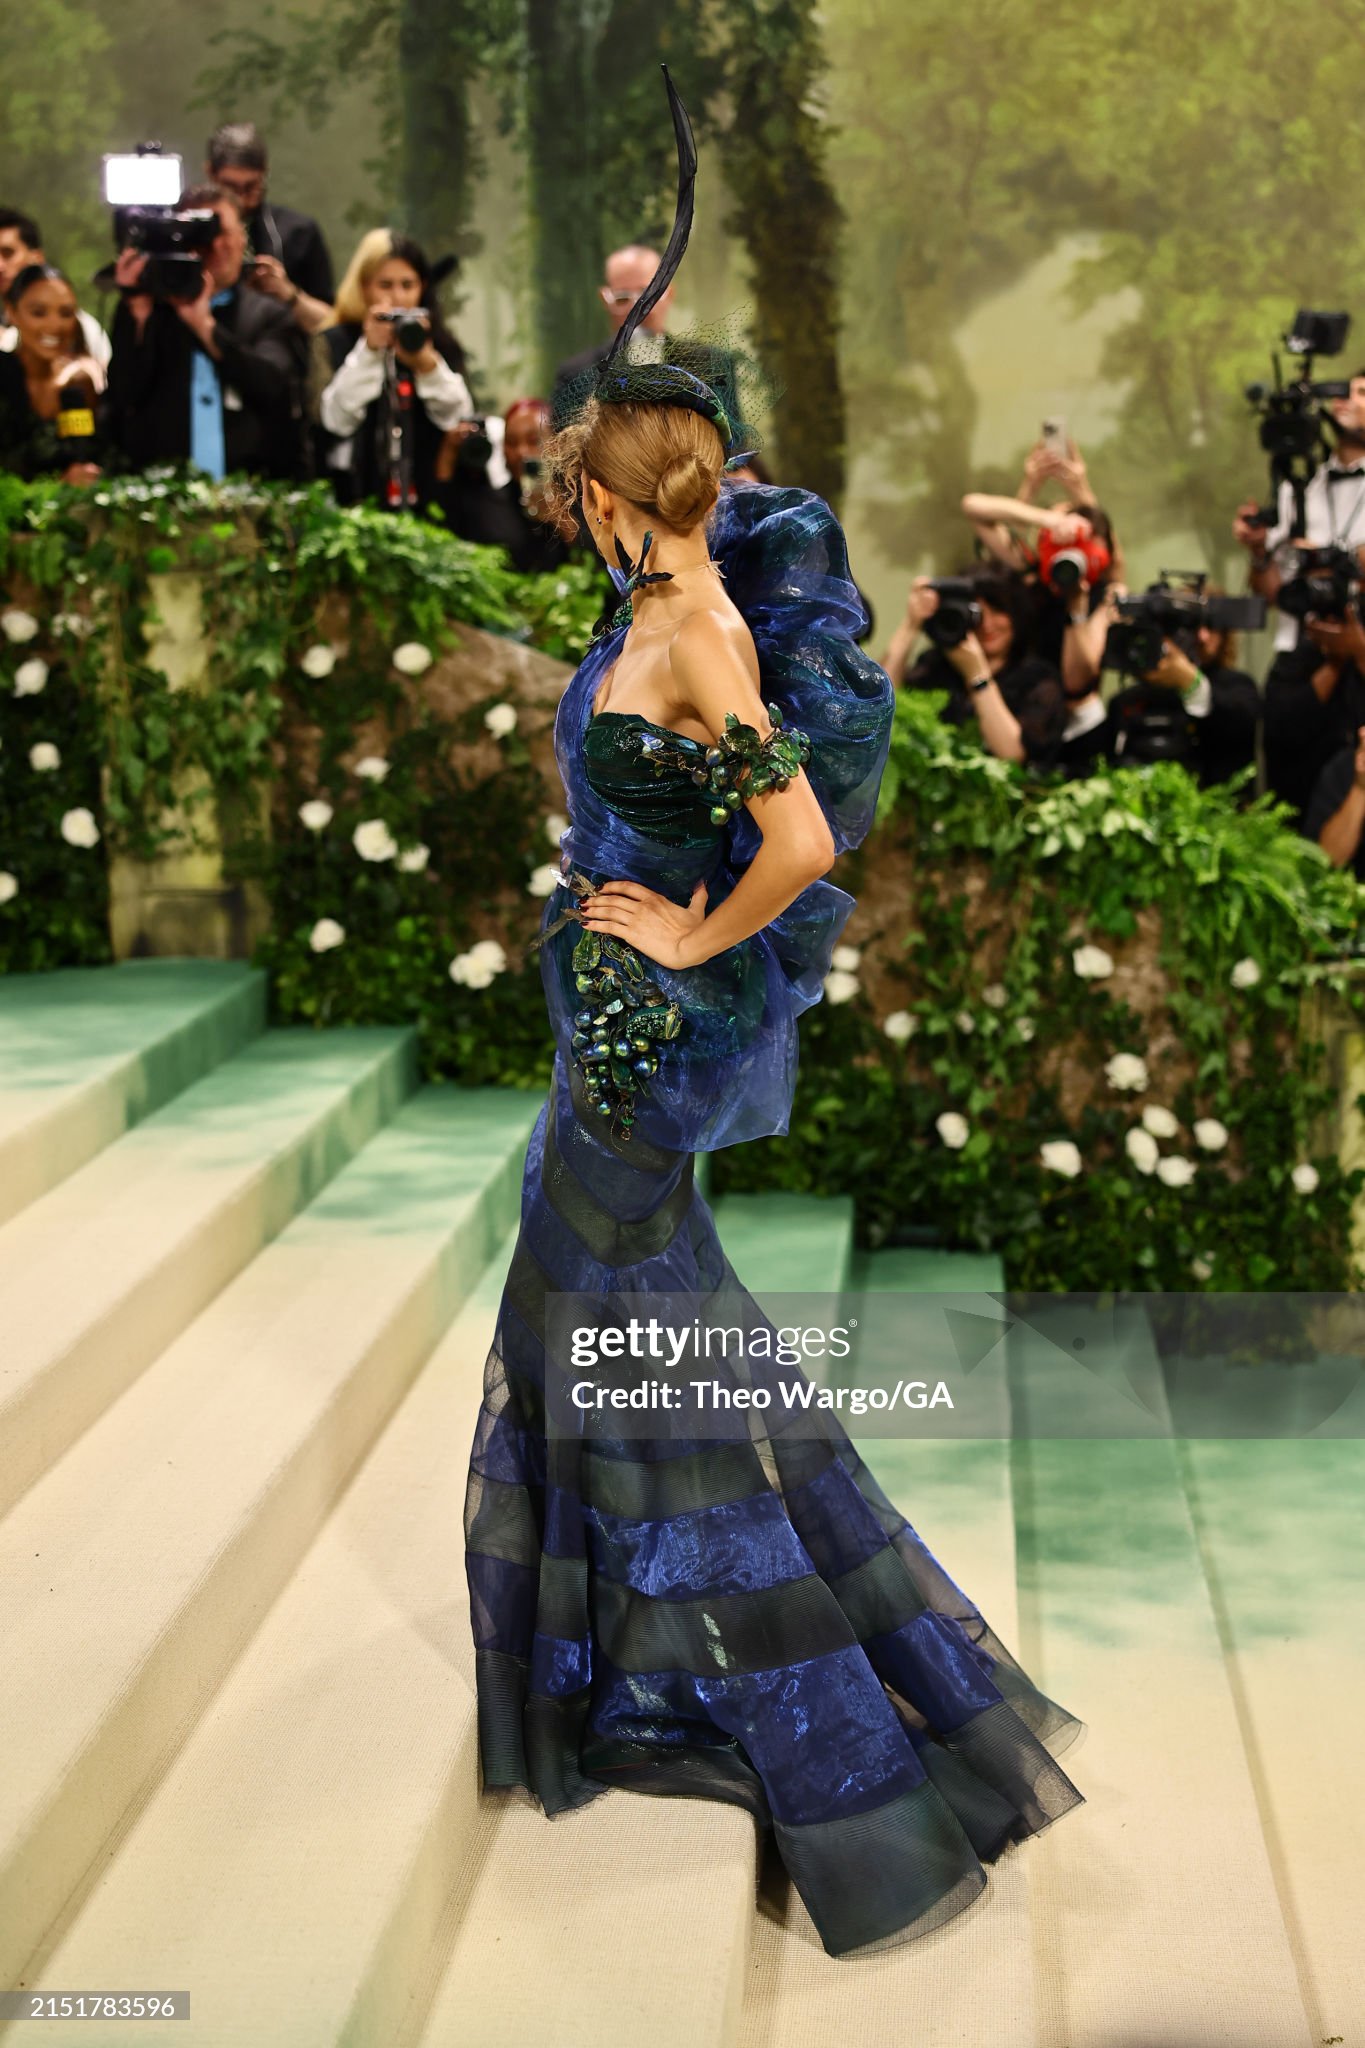 gettyimages-2151783596-2048x2048.jpg